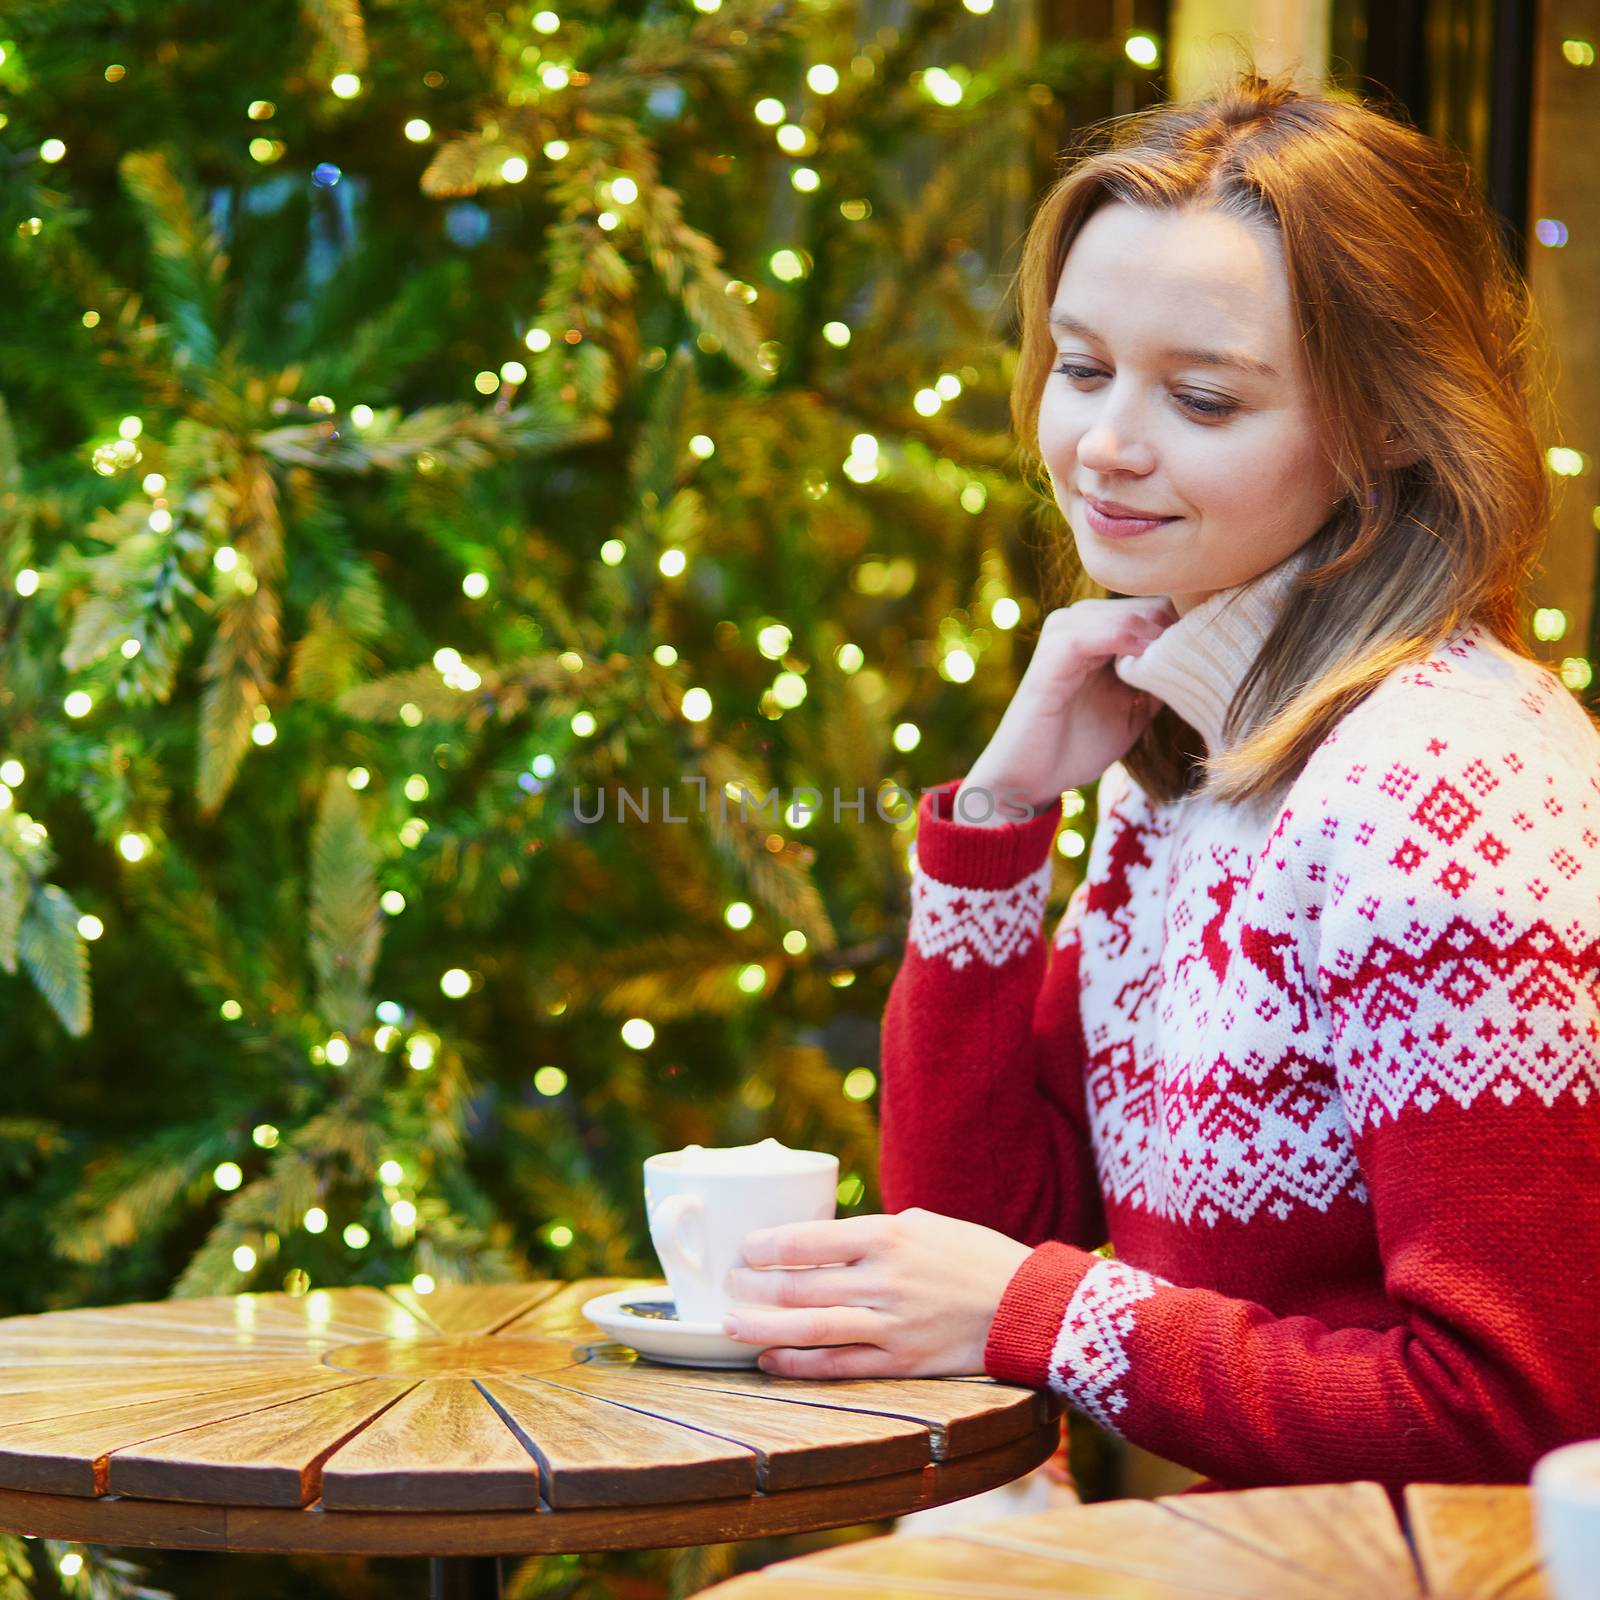 Girl in holiday sweater drinking coffee or hot chocolate in cafe by jaspe